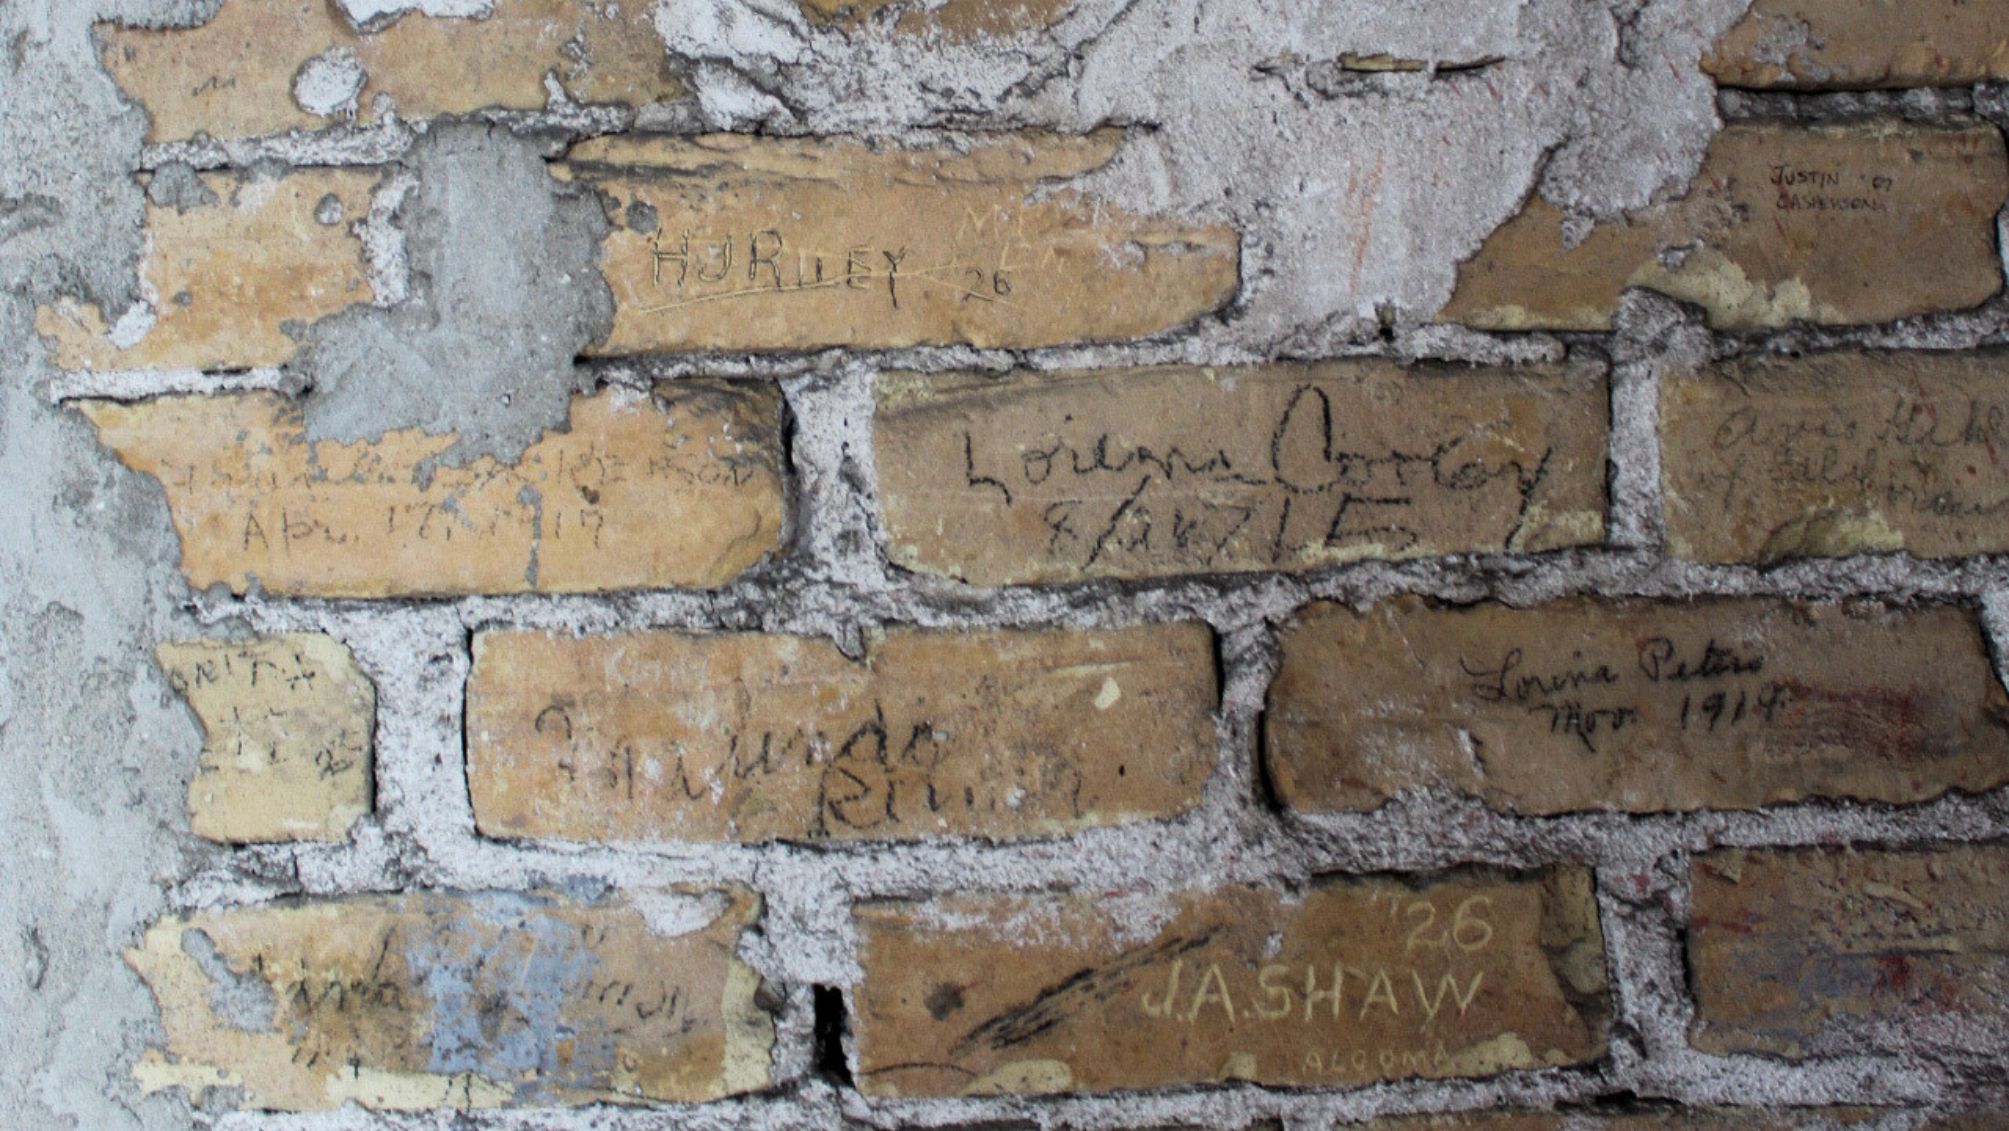 Graffiti on bricks walls in the tower of the 1889 Courthouse of The Tower Heritage Center in West Bend, Wisconsin